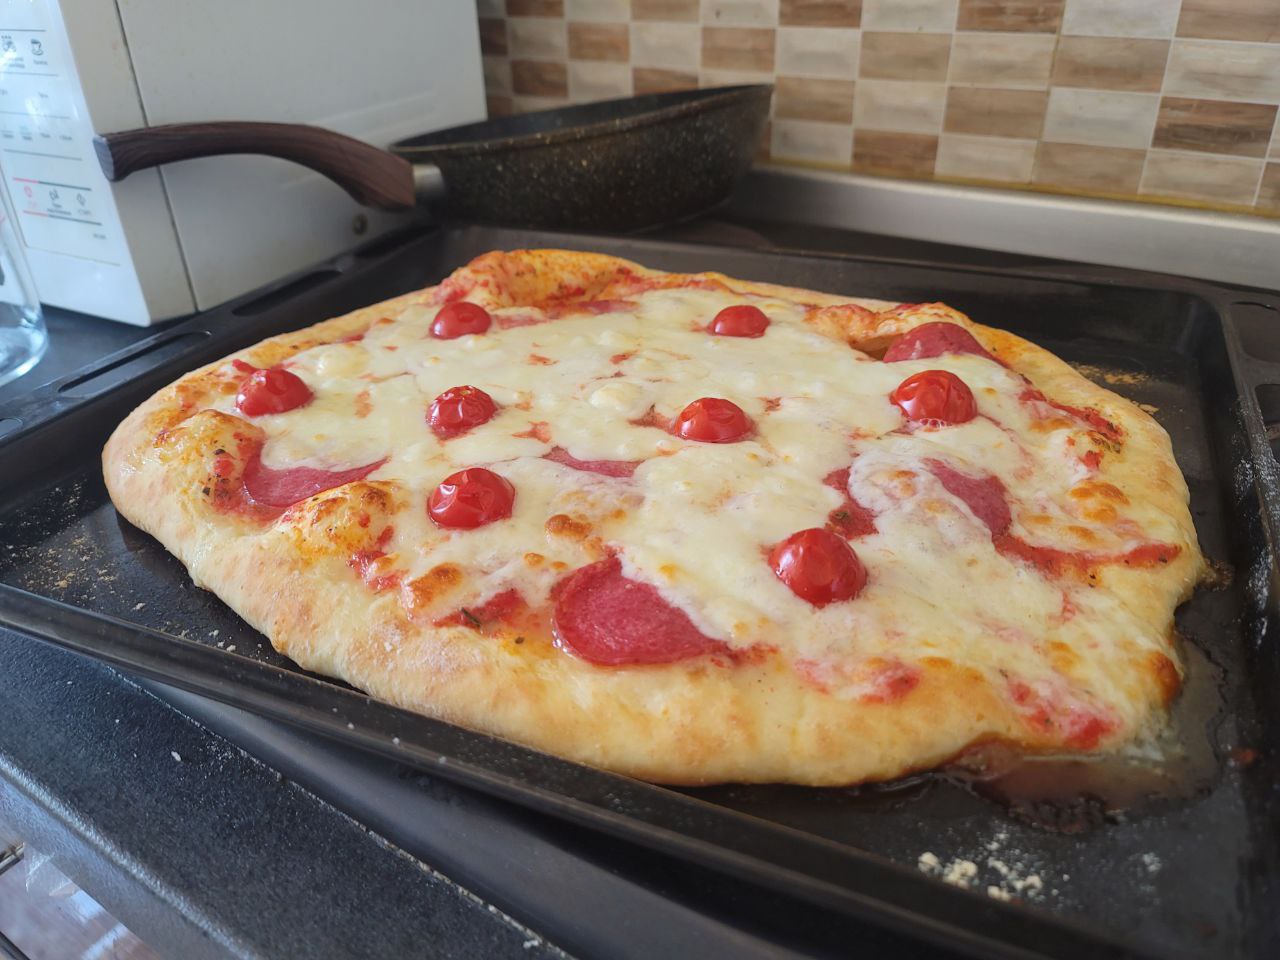 fresh pizza on the oven pan with mozzarella cheese, italian sausage, tomato sauce and cherry tomatoes